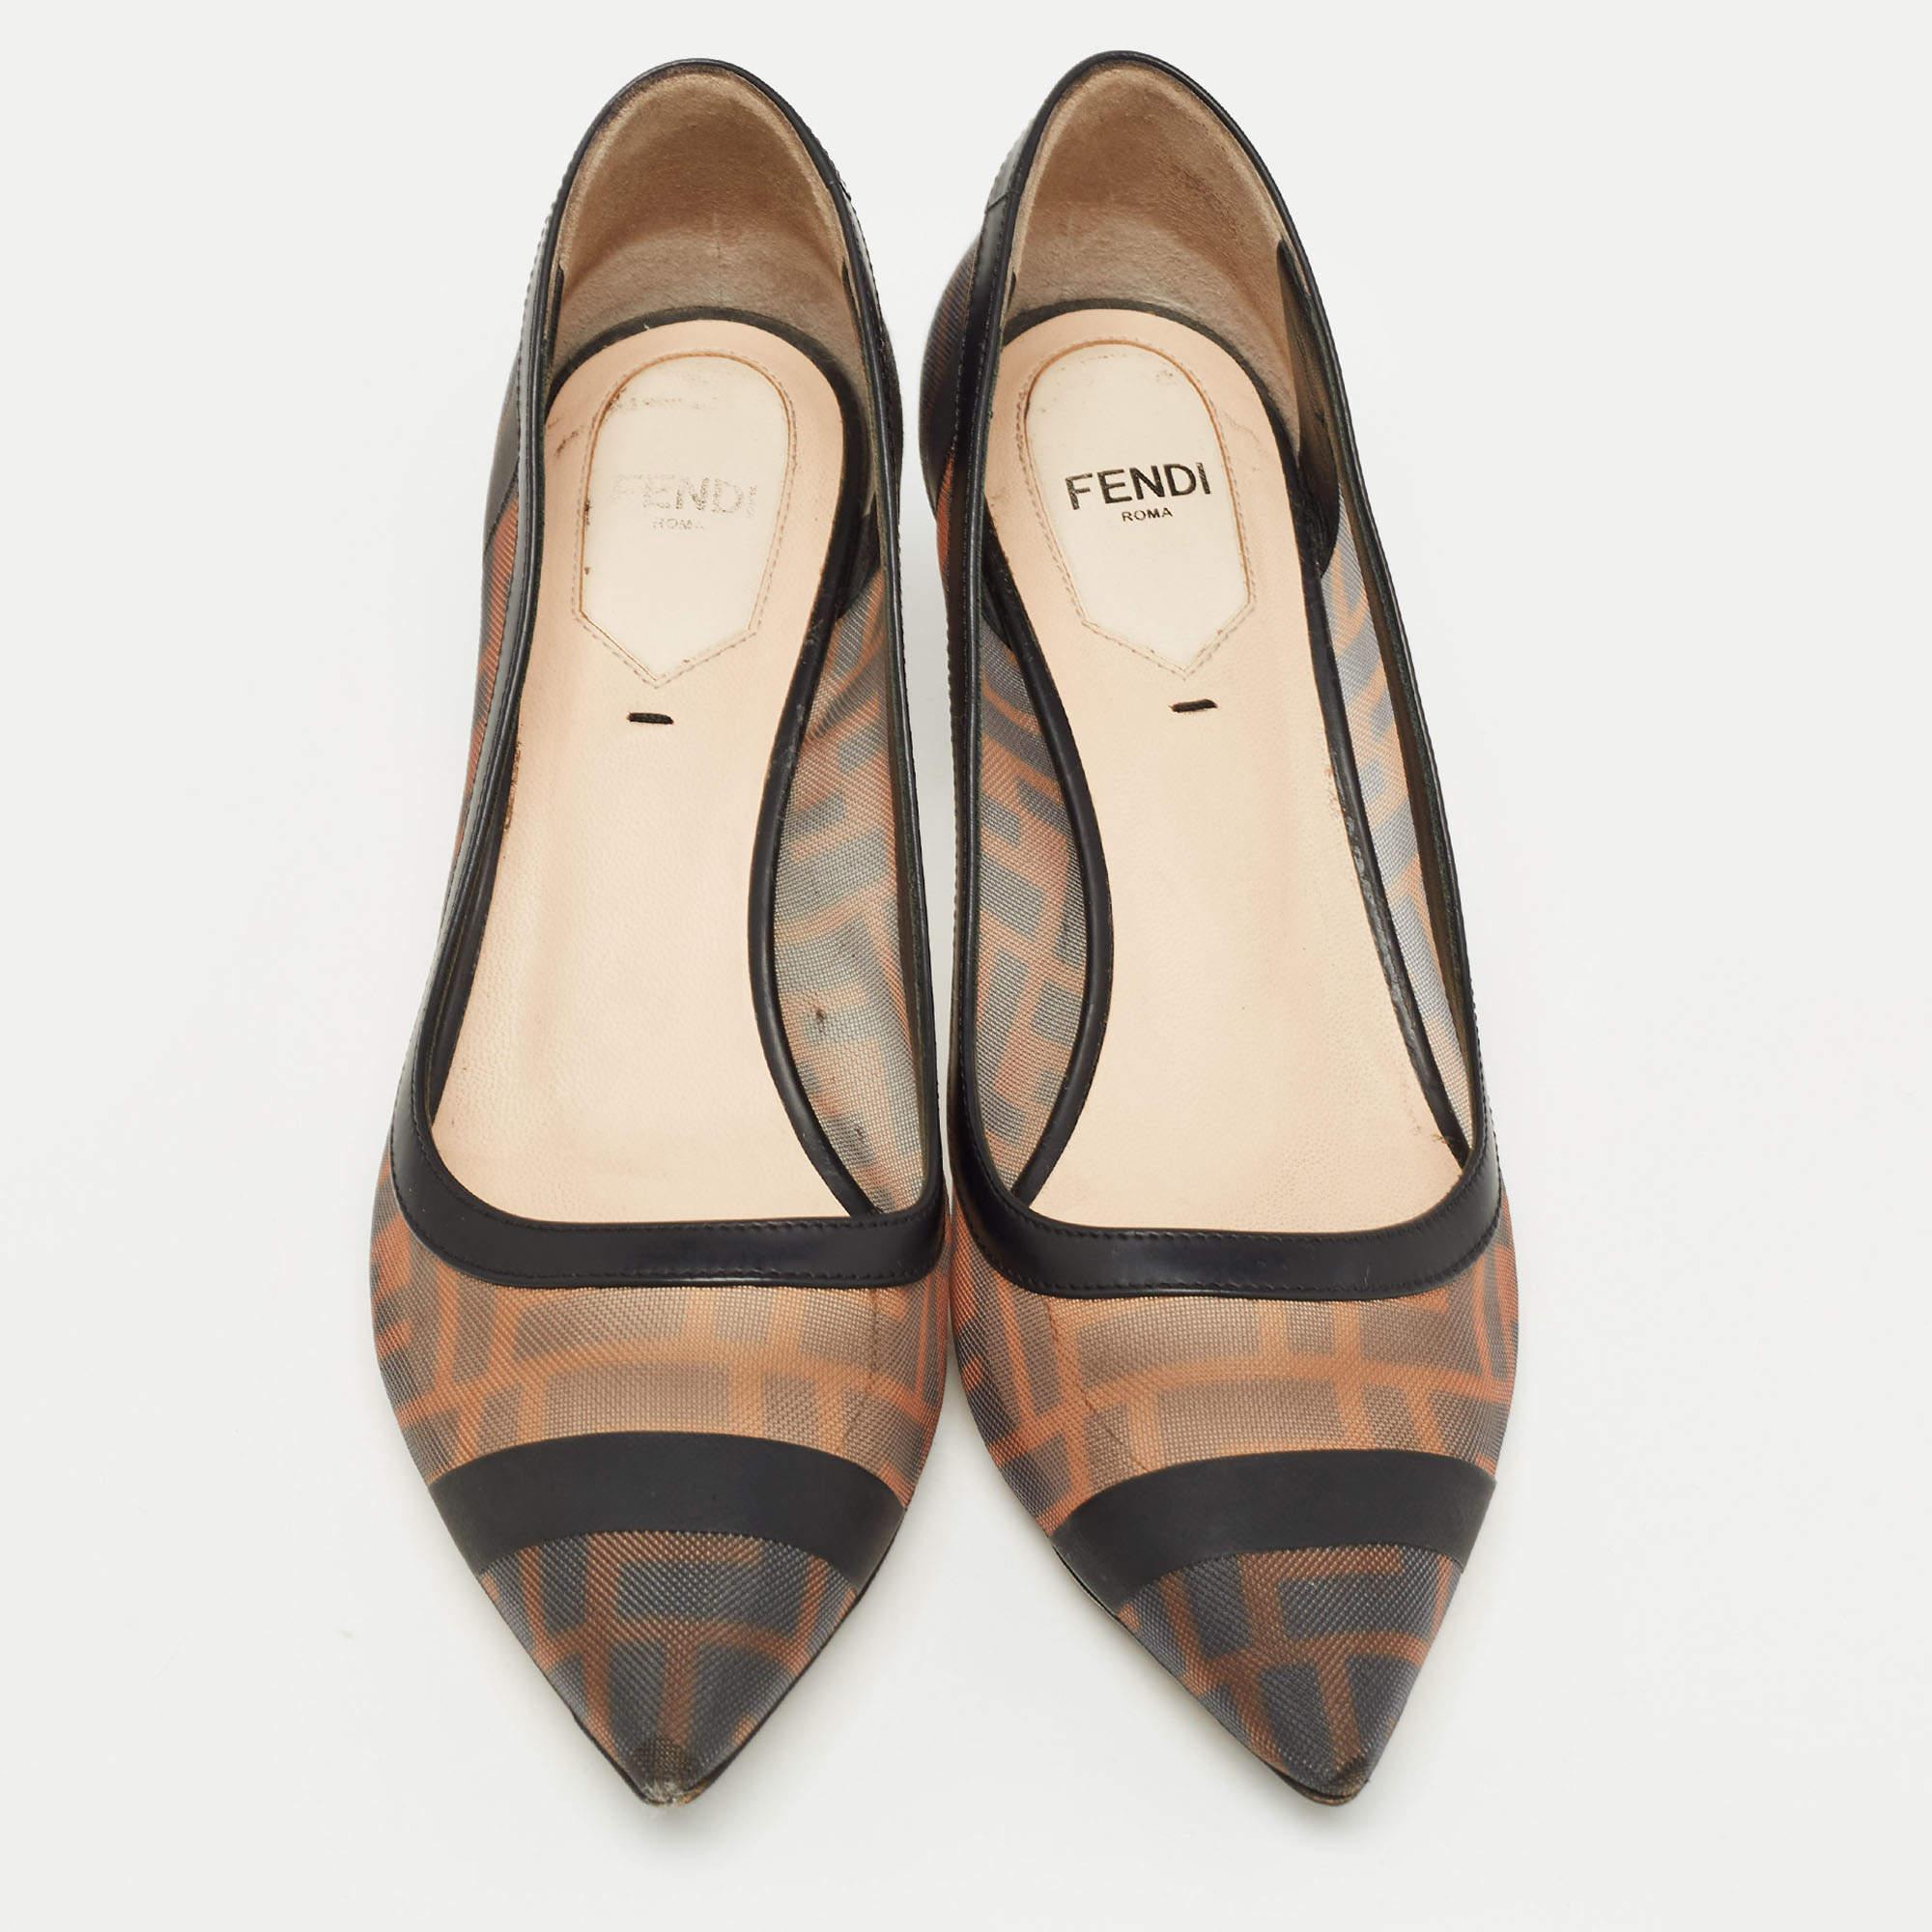 Complement your well-put-together outfit with these authentic Fendi heels. Timeless and classy, they have an amazing construction for enduring quality and comfortable fit.

Includes
Original Dustbag, Price Tag